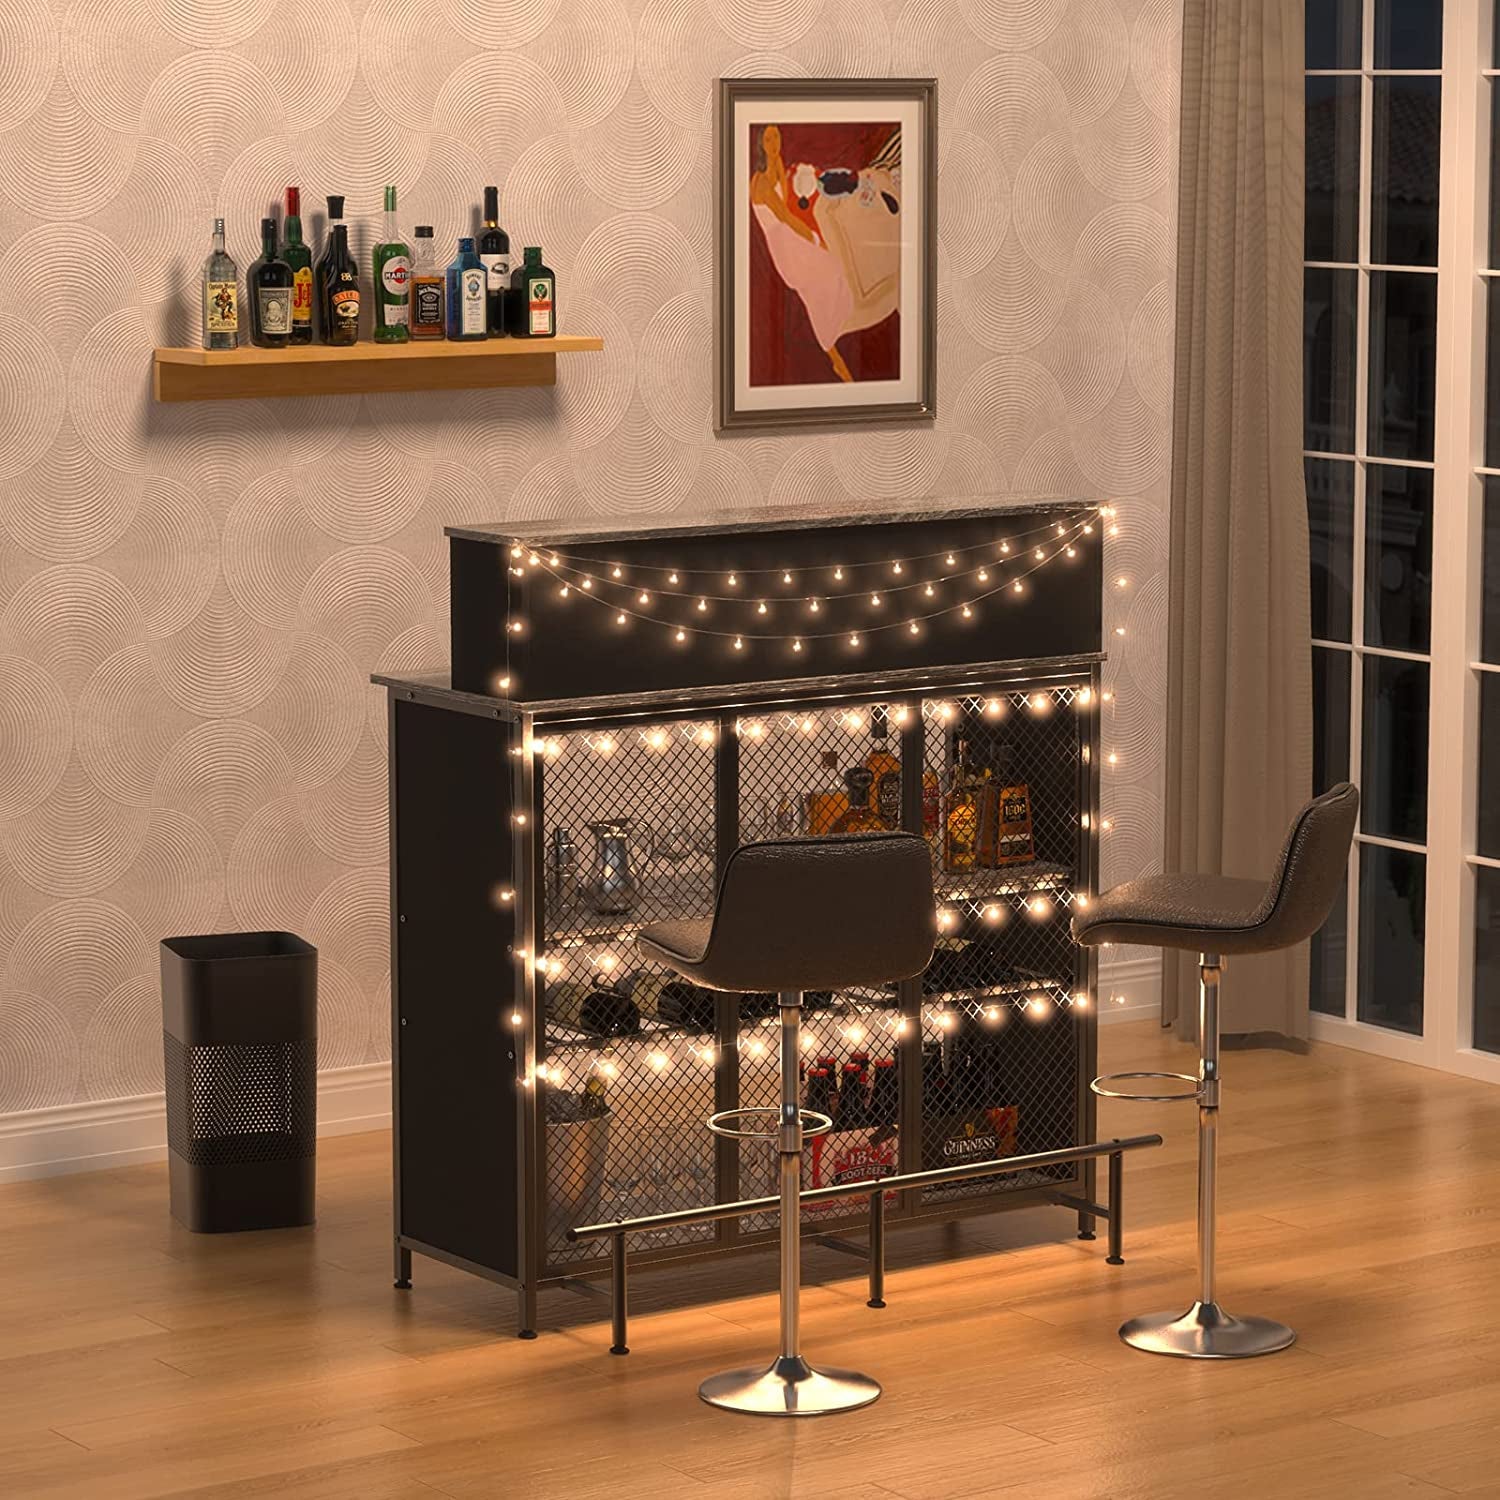 GDLF Home Bar Unit Mini Bar Liquor Bar Table with Storage and Footrest for Home Kitchen Pub (Grey)